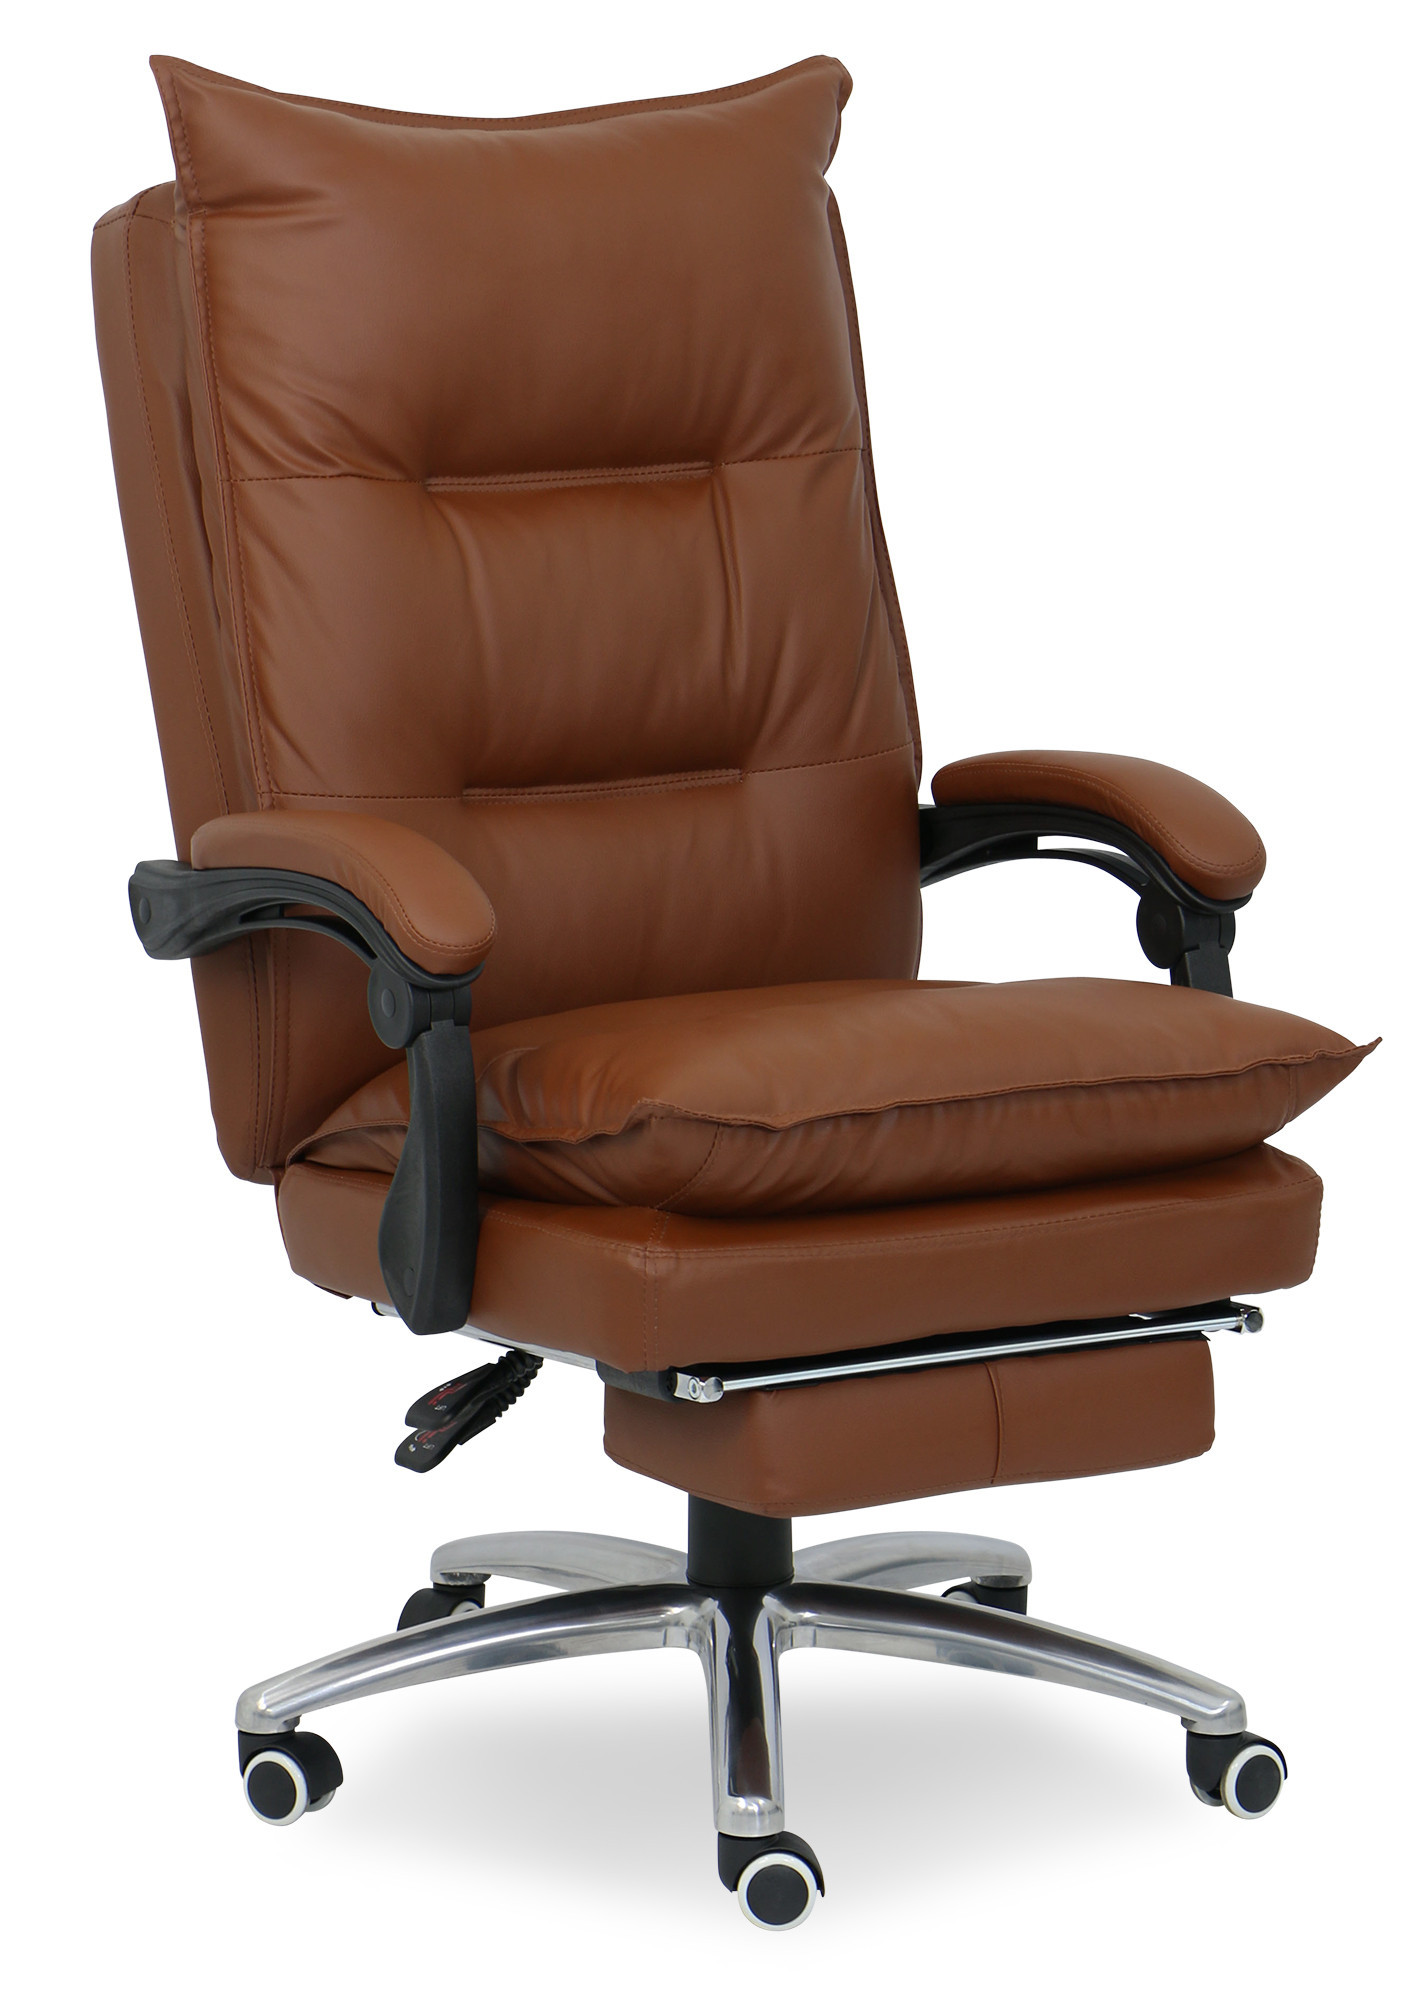 Best ideas about Executive Office Chair
. Save or Pin Deluxe Pu Executive fice Chair Brown Now.